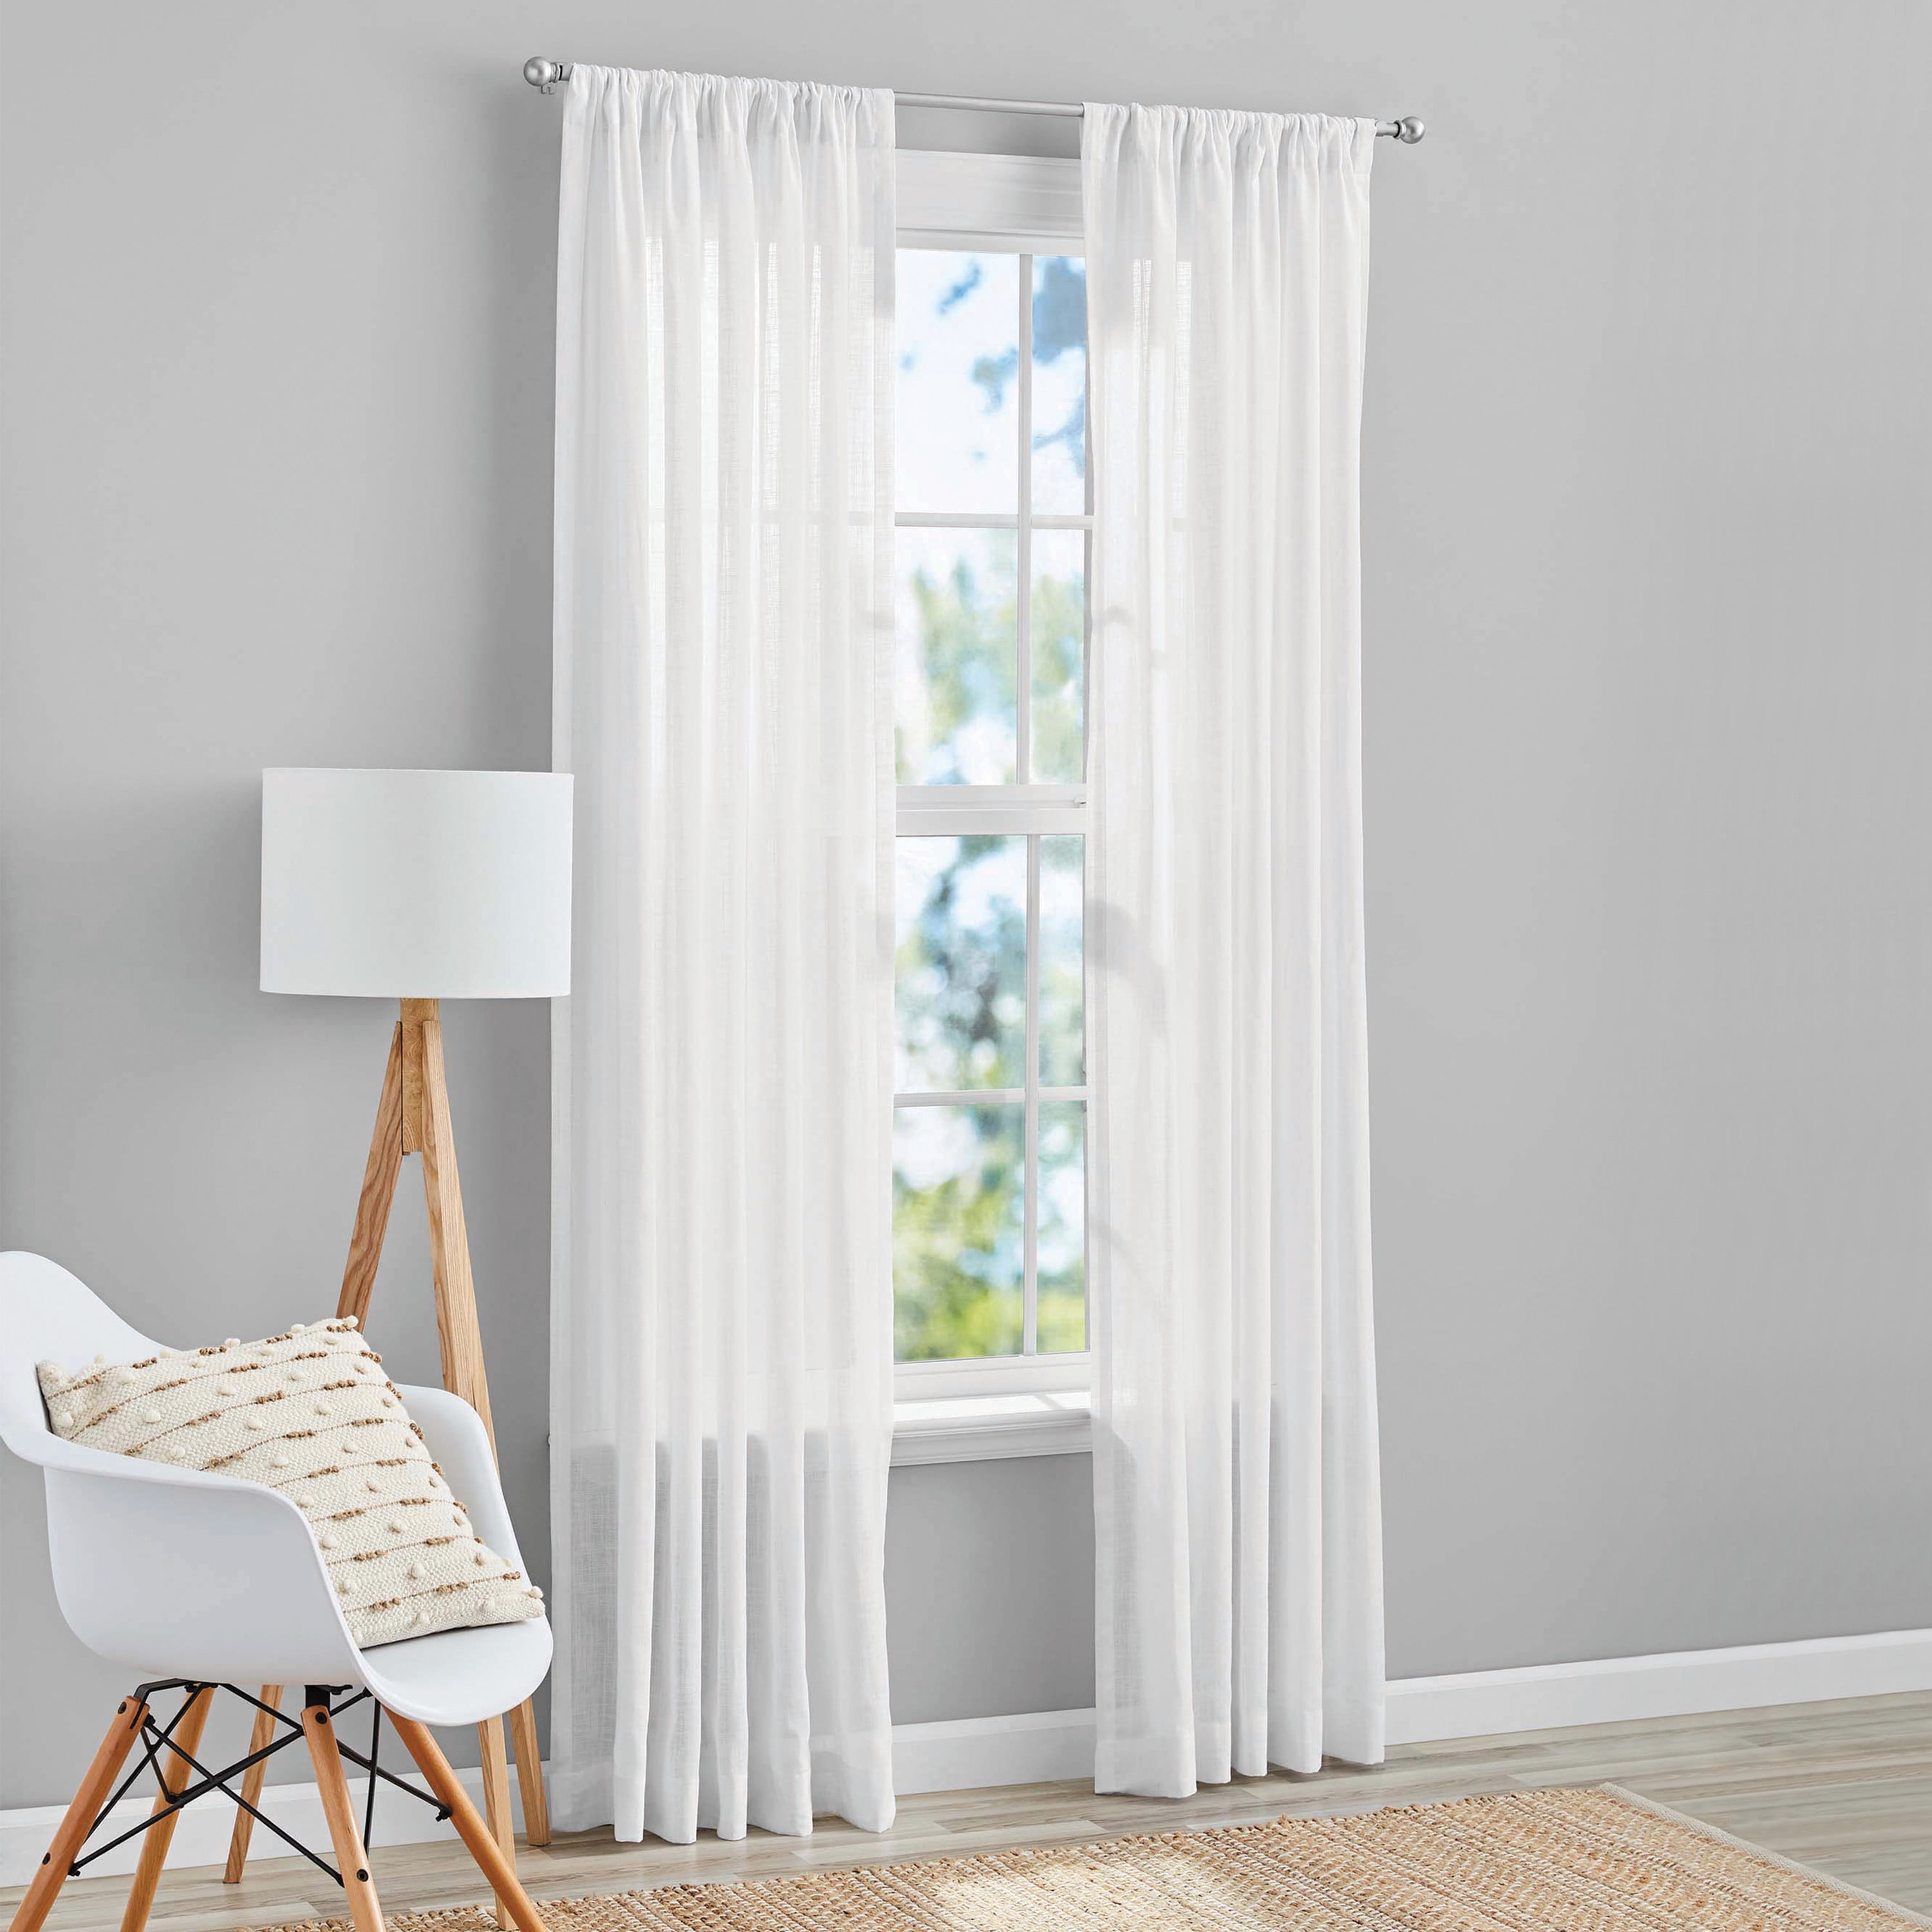 Mainstays 51'' x 63'' Single Curtain Canopy Crushed Voile Drapery Panel WHITE 